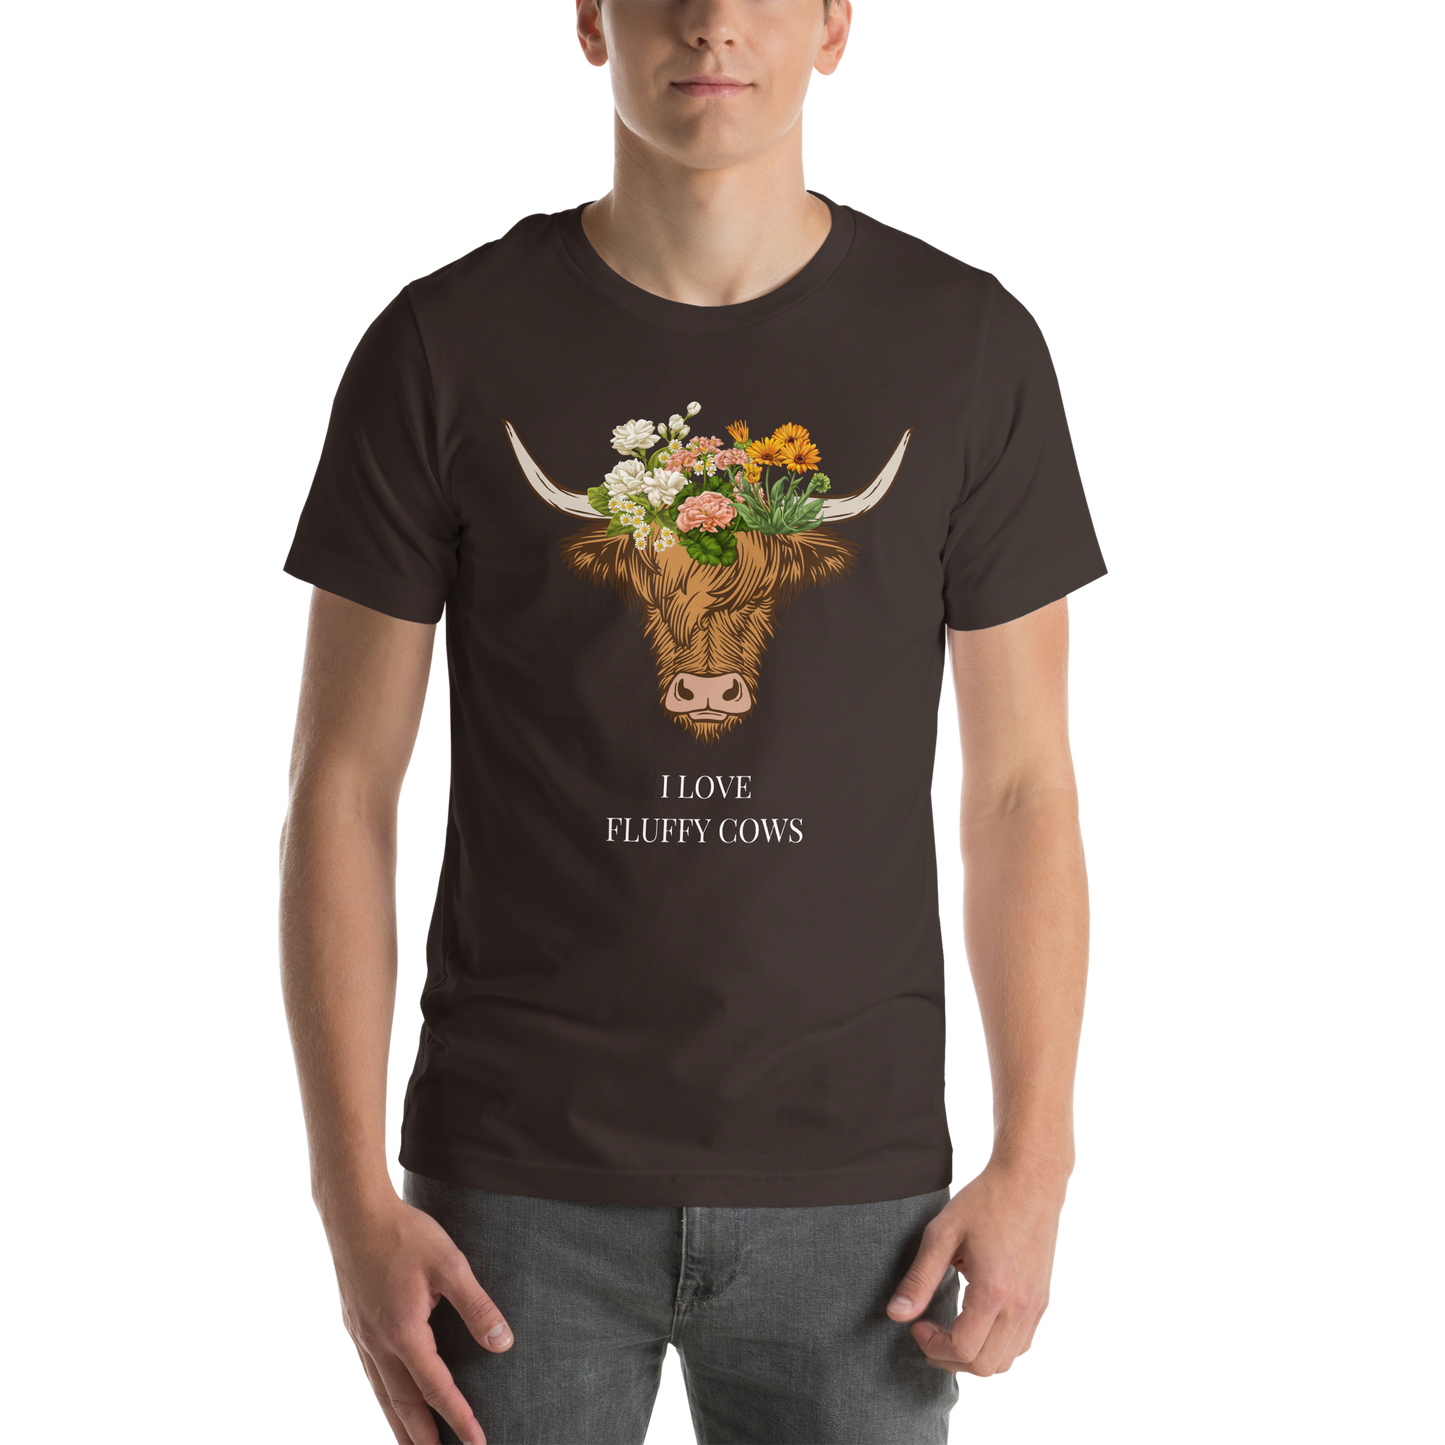 Man wearing a Brown Premium Highland Cow Tee featuring an adorable I Love Fluffy Cows graphic on the chest - Cute Graphic Highland Cow Tees - Boozy Fox